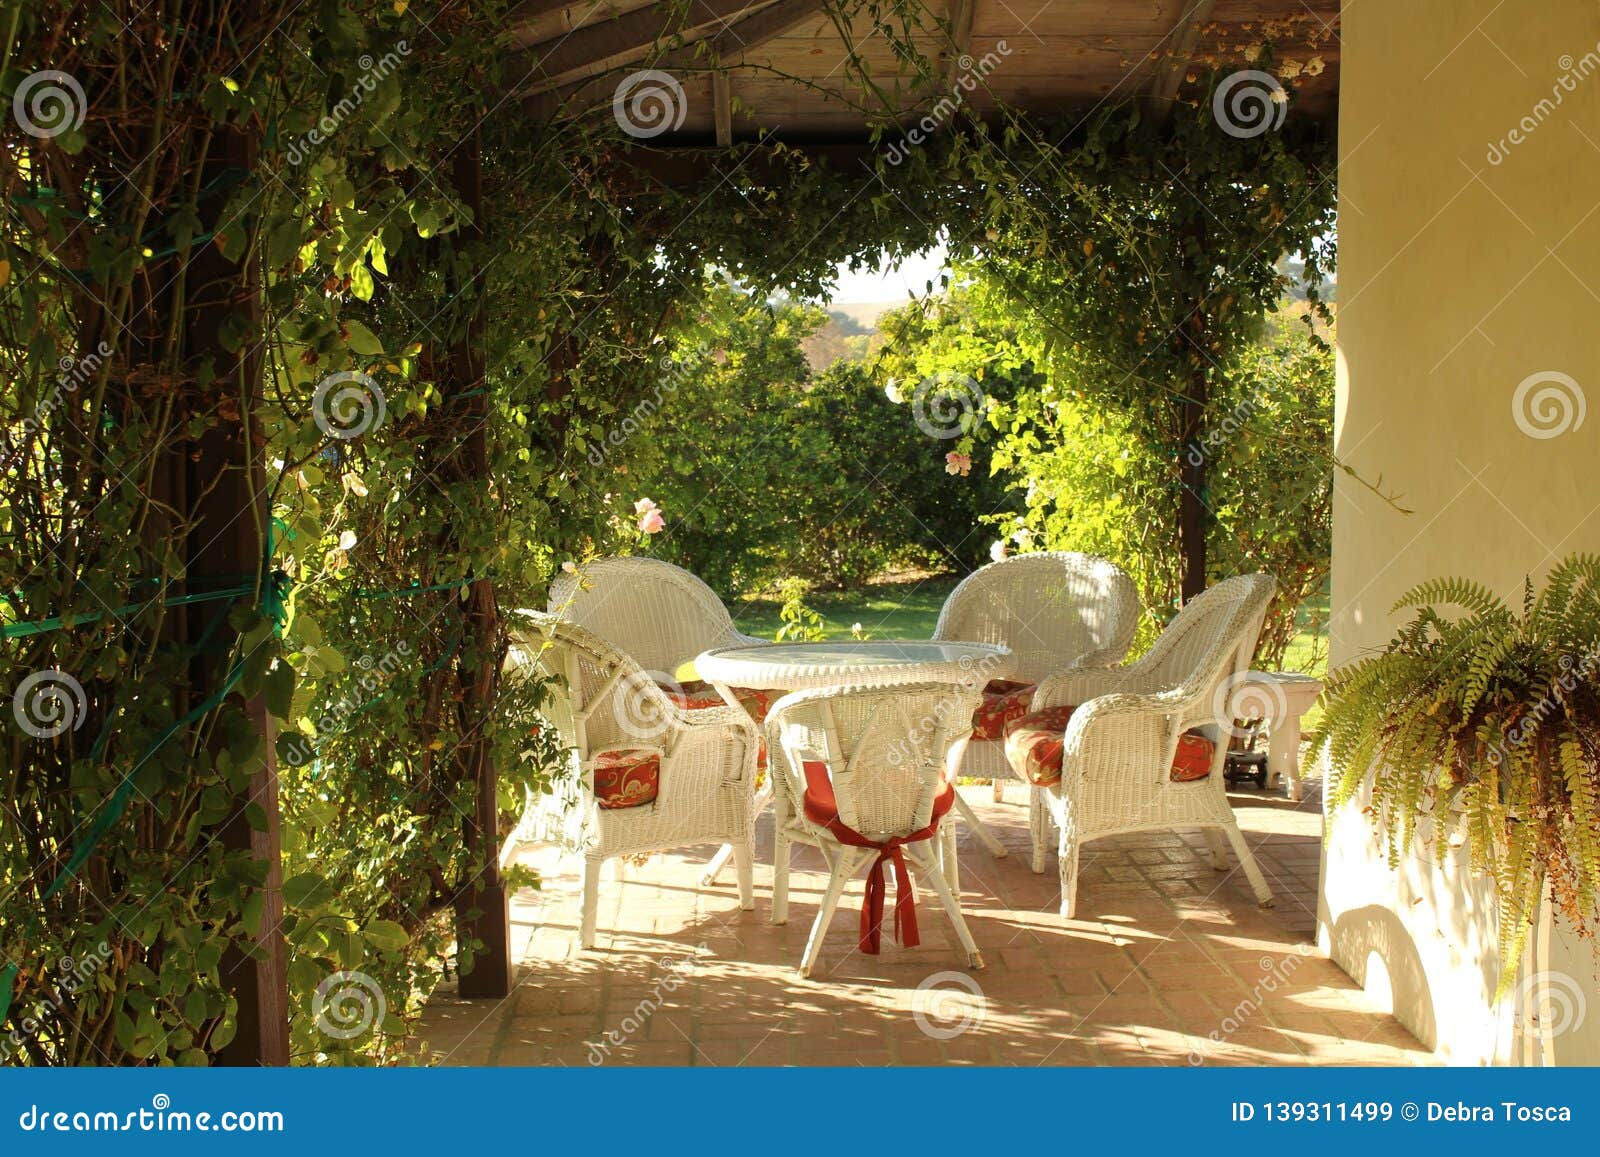 Outdoor Patio Furniture Stock Image Image Of Wicker 139311499